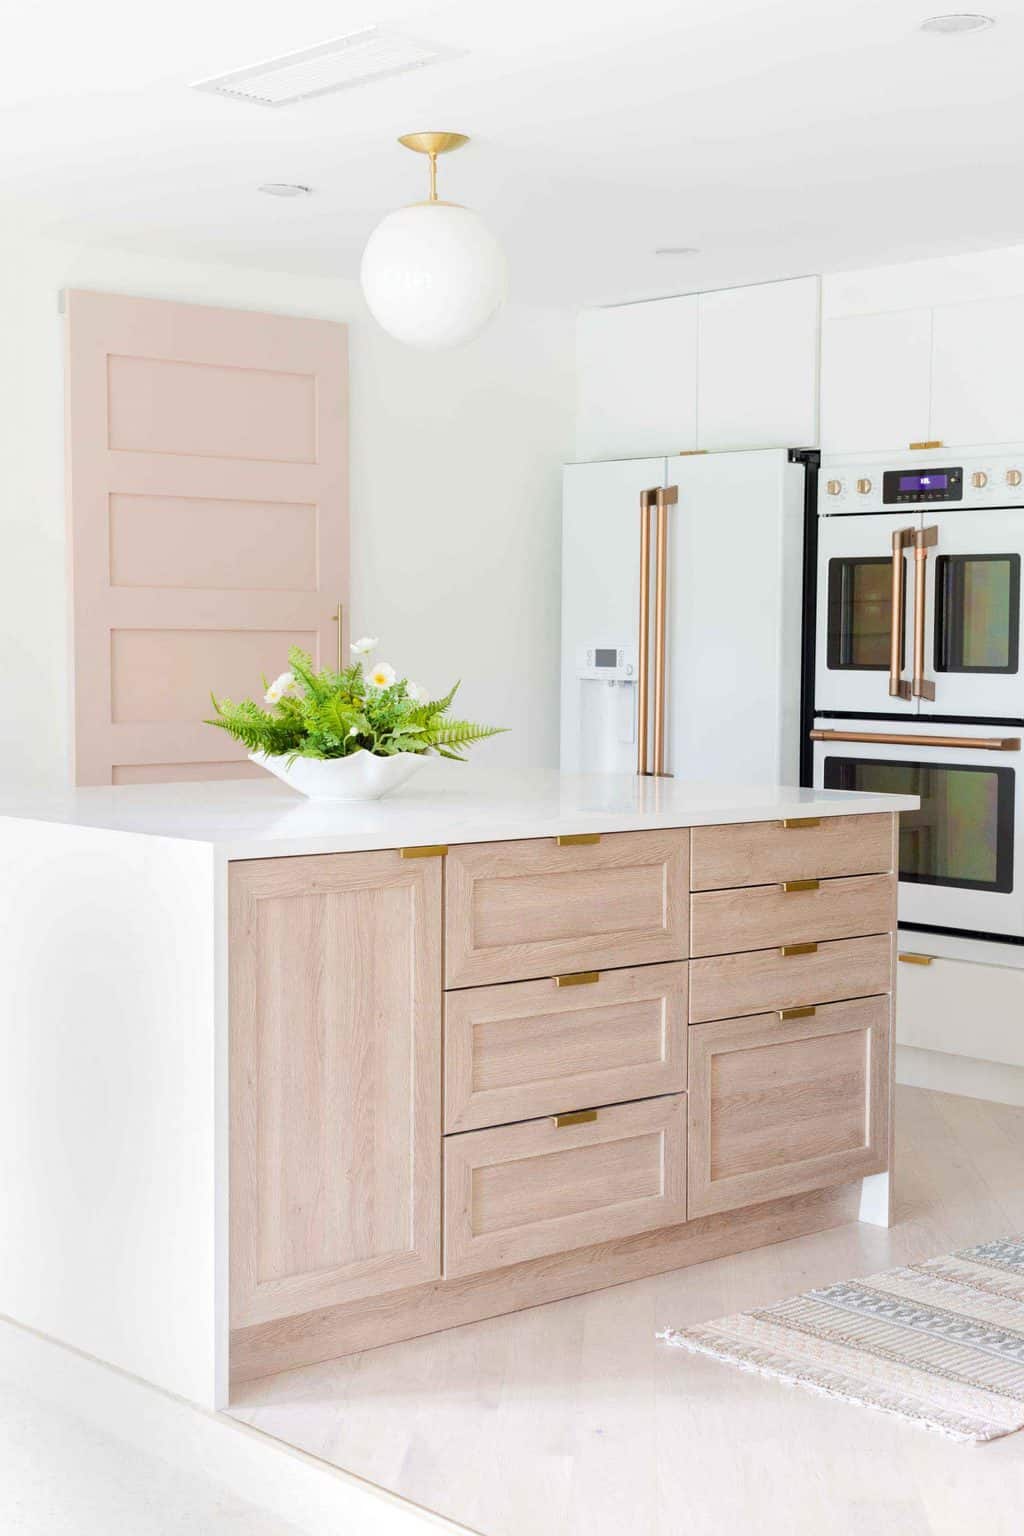 Our kitchen renovation was at the very top of my to-do list when we bought this fixer upper and I'm so excited to share the final kitchen before and after photos!! Sugar & Cloth Casa: Our Renovation Kitchen Before & After by top Houston lifestyle blogger Ashley Rose of Sugar and Cloth #kitchen #decor #design #makeover